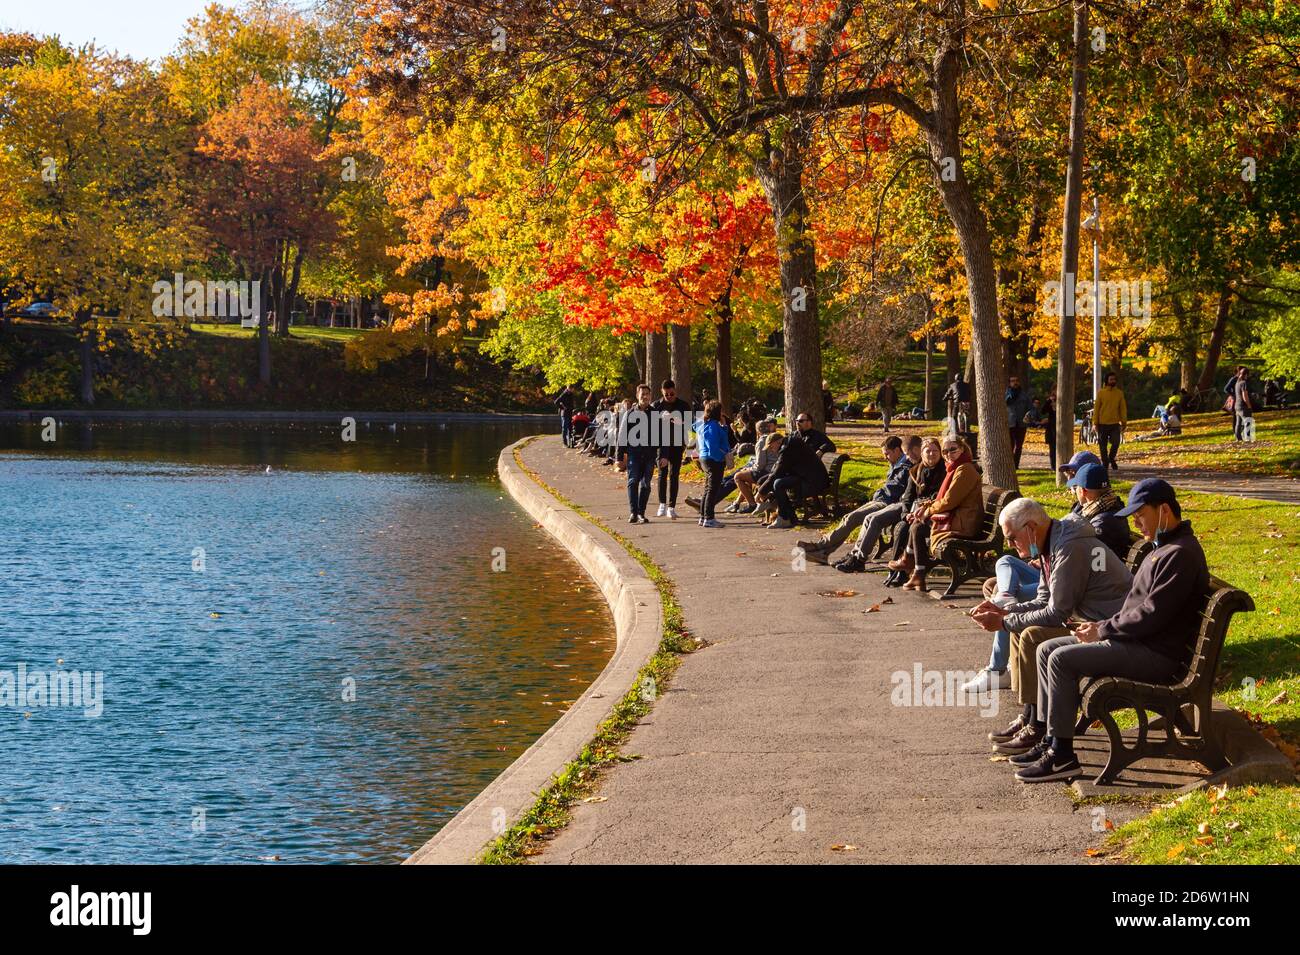 Montreal, CA - 19 October 2020: People enjoying a warm and sunny day at La Fontaine Park in the Autumn season Stock Photo